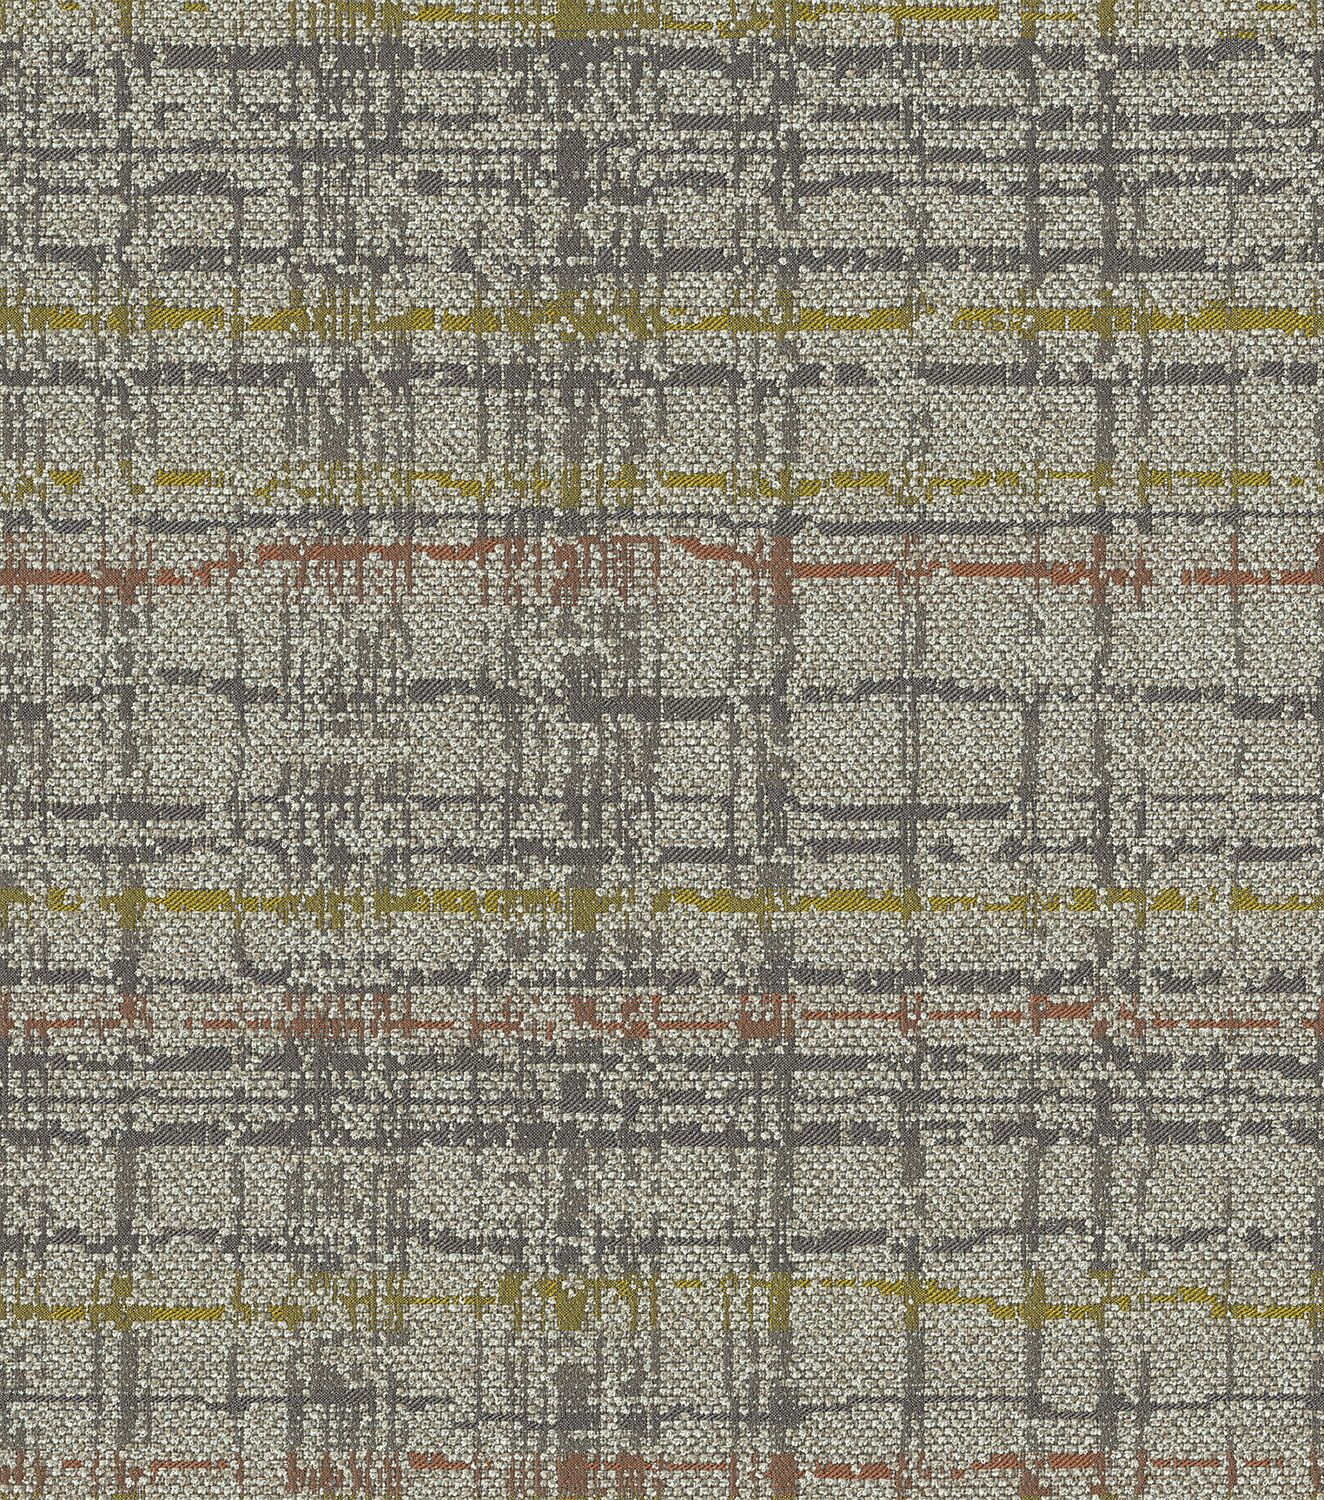 Geoglyph - Drifting Sediment - 4107 - 01 Tileable Swatches